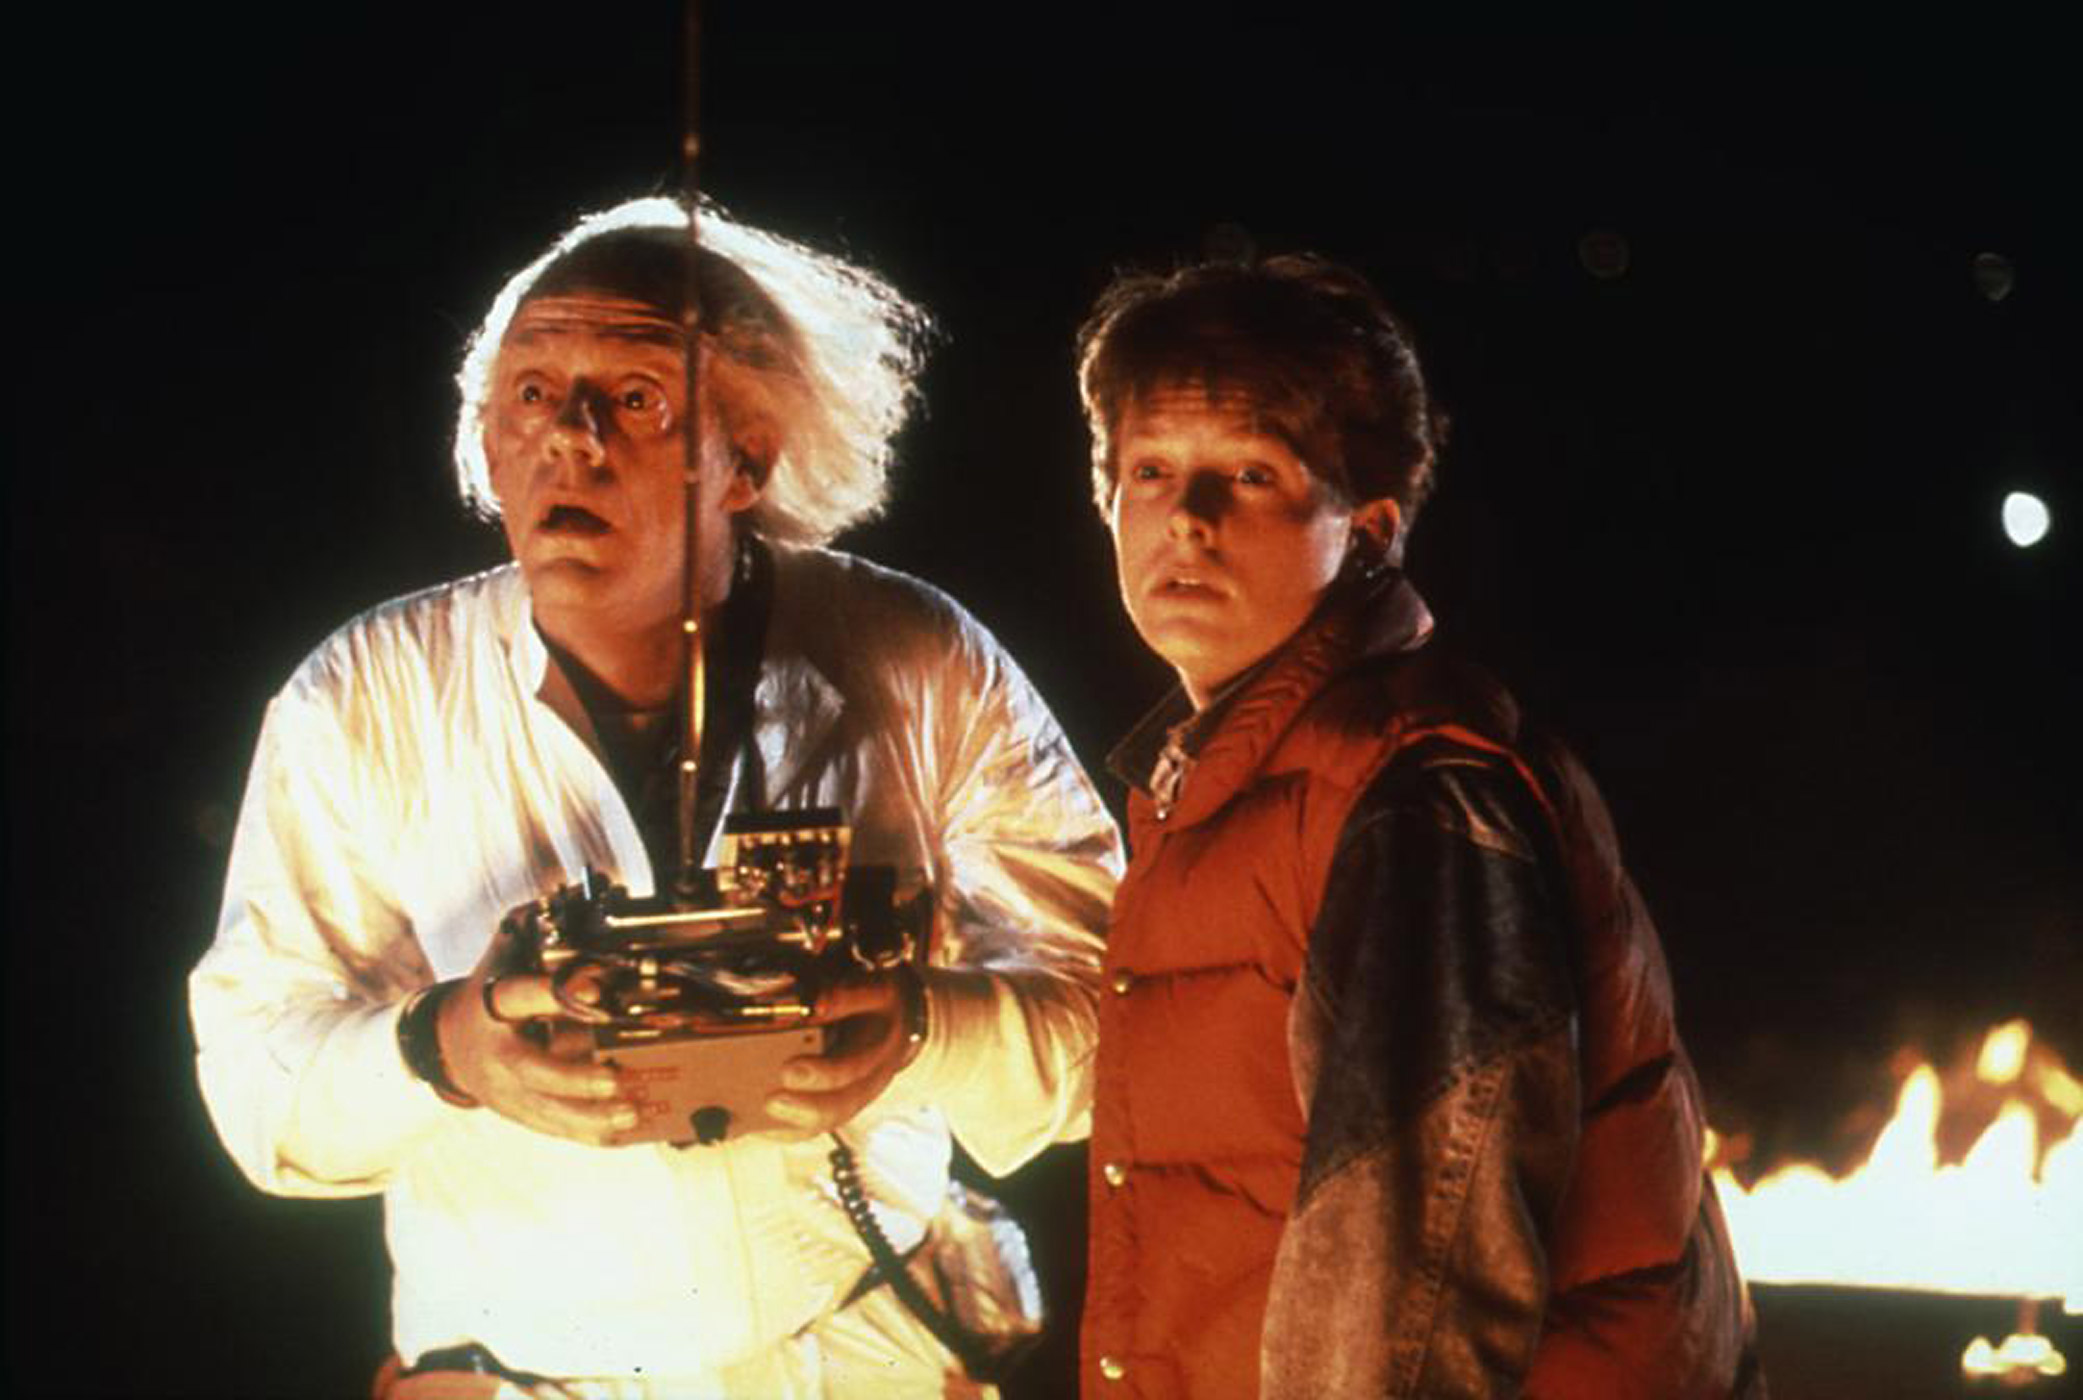 back-to-the-future.jpg (2083×1400)